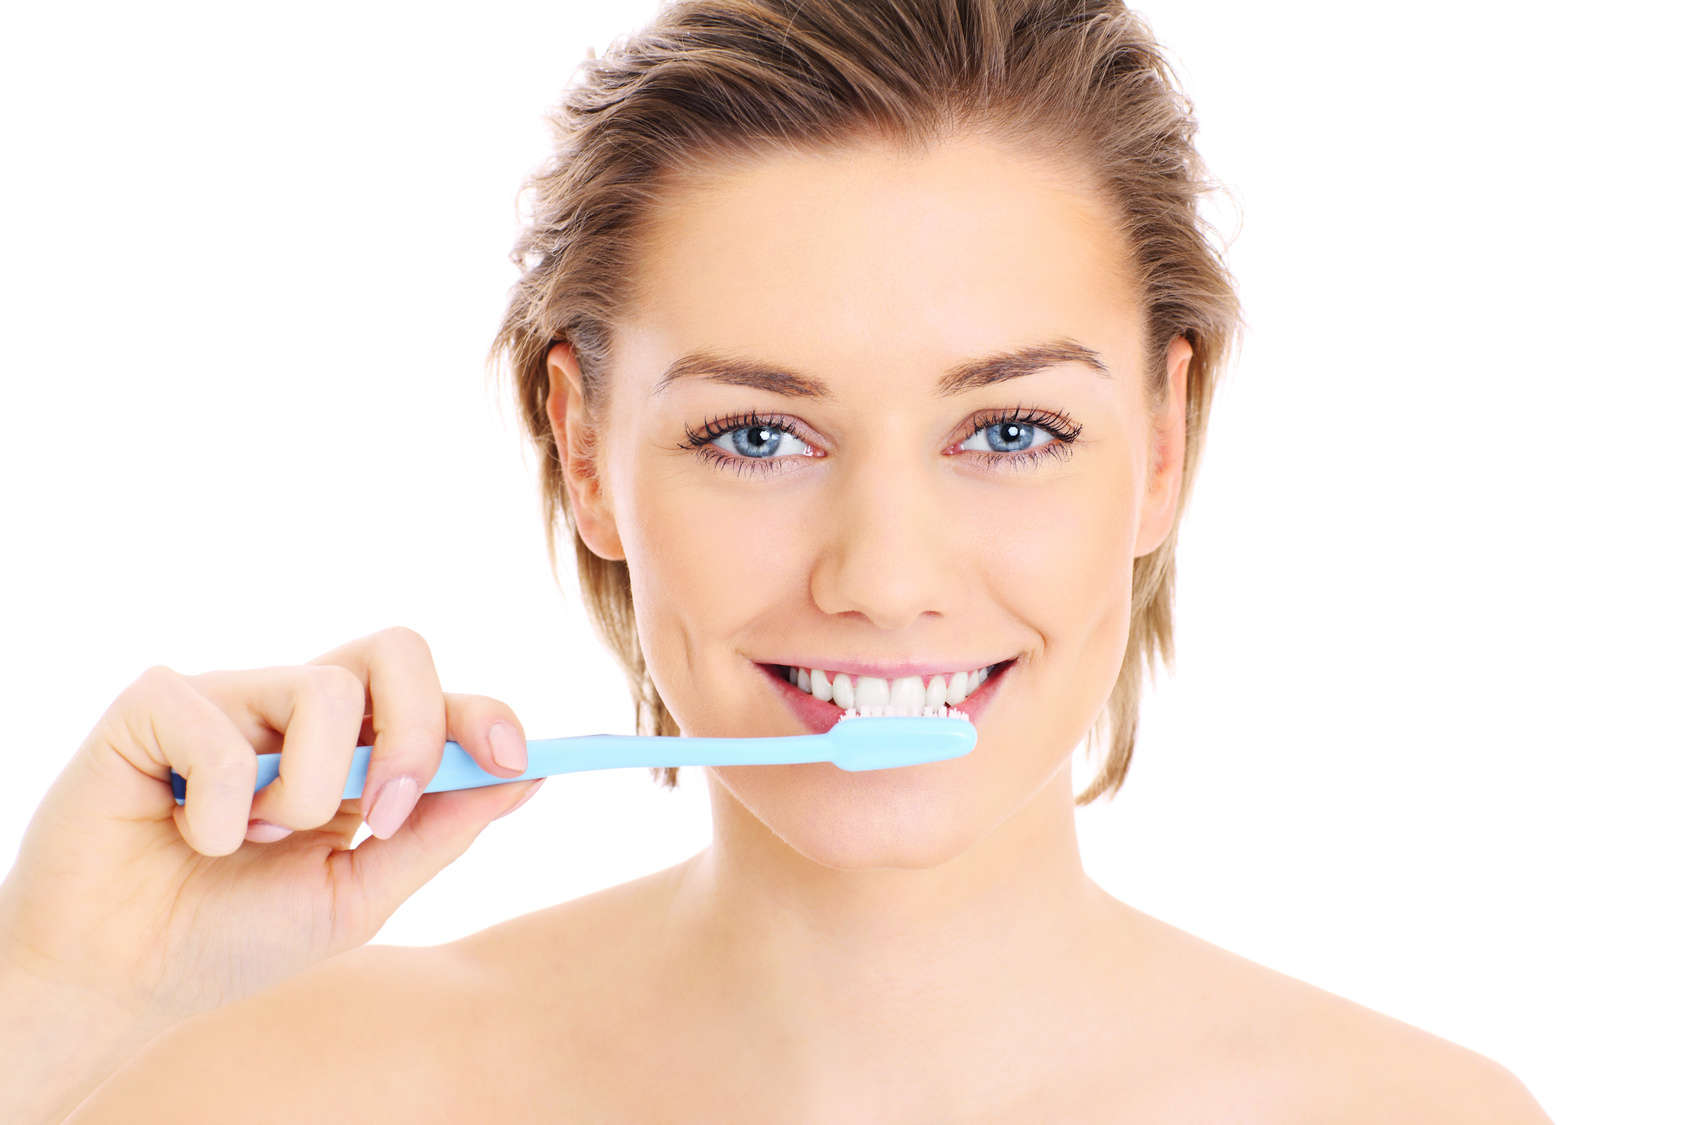 4 Ways Your Dental Care Regimen May be Flawed